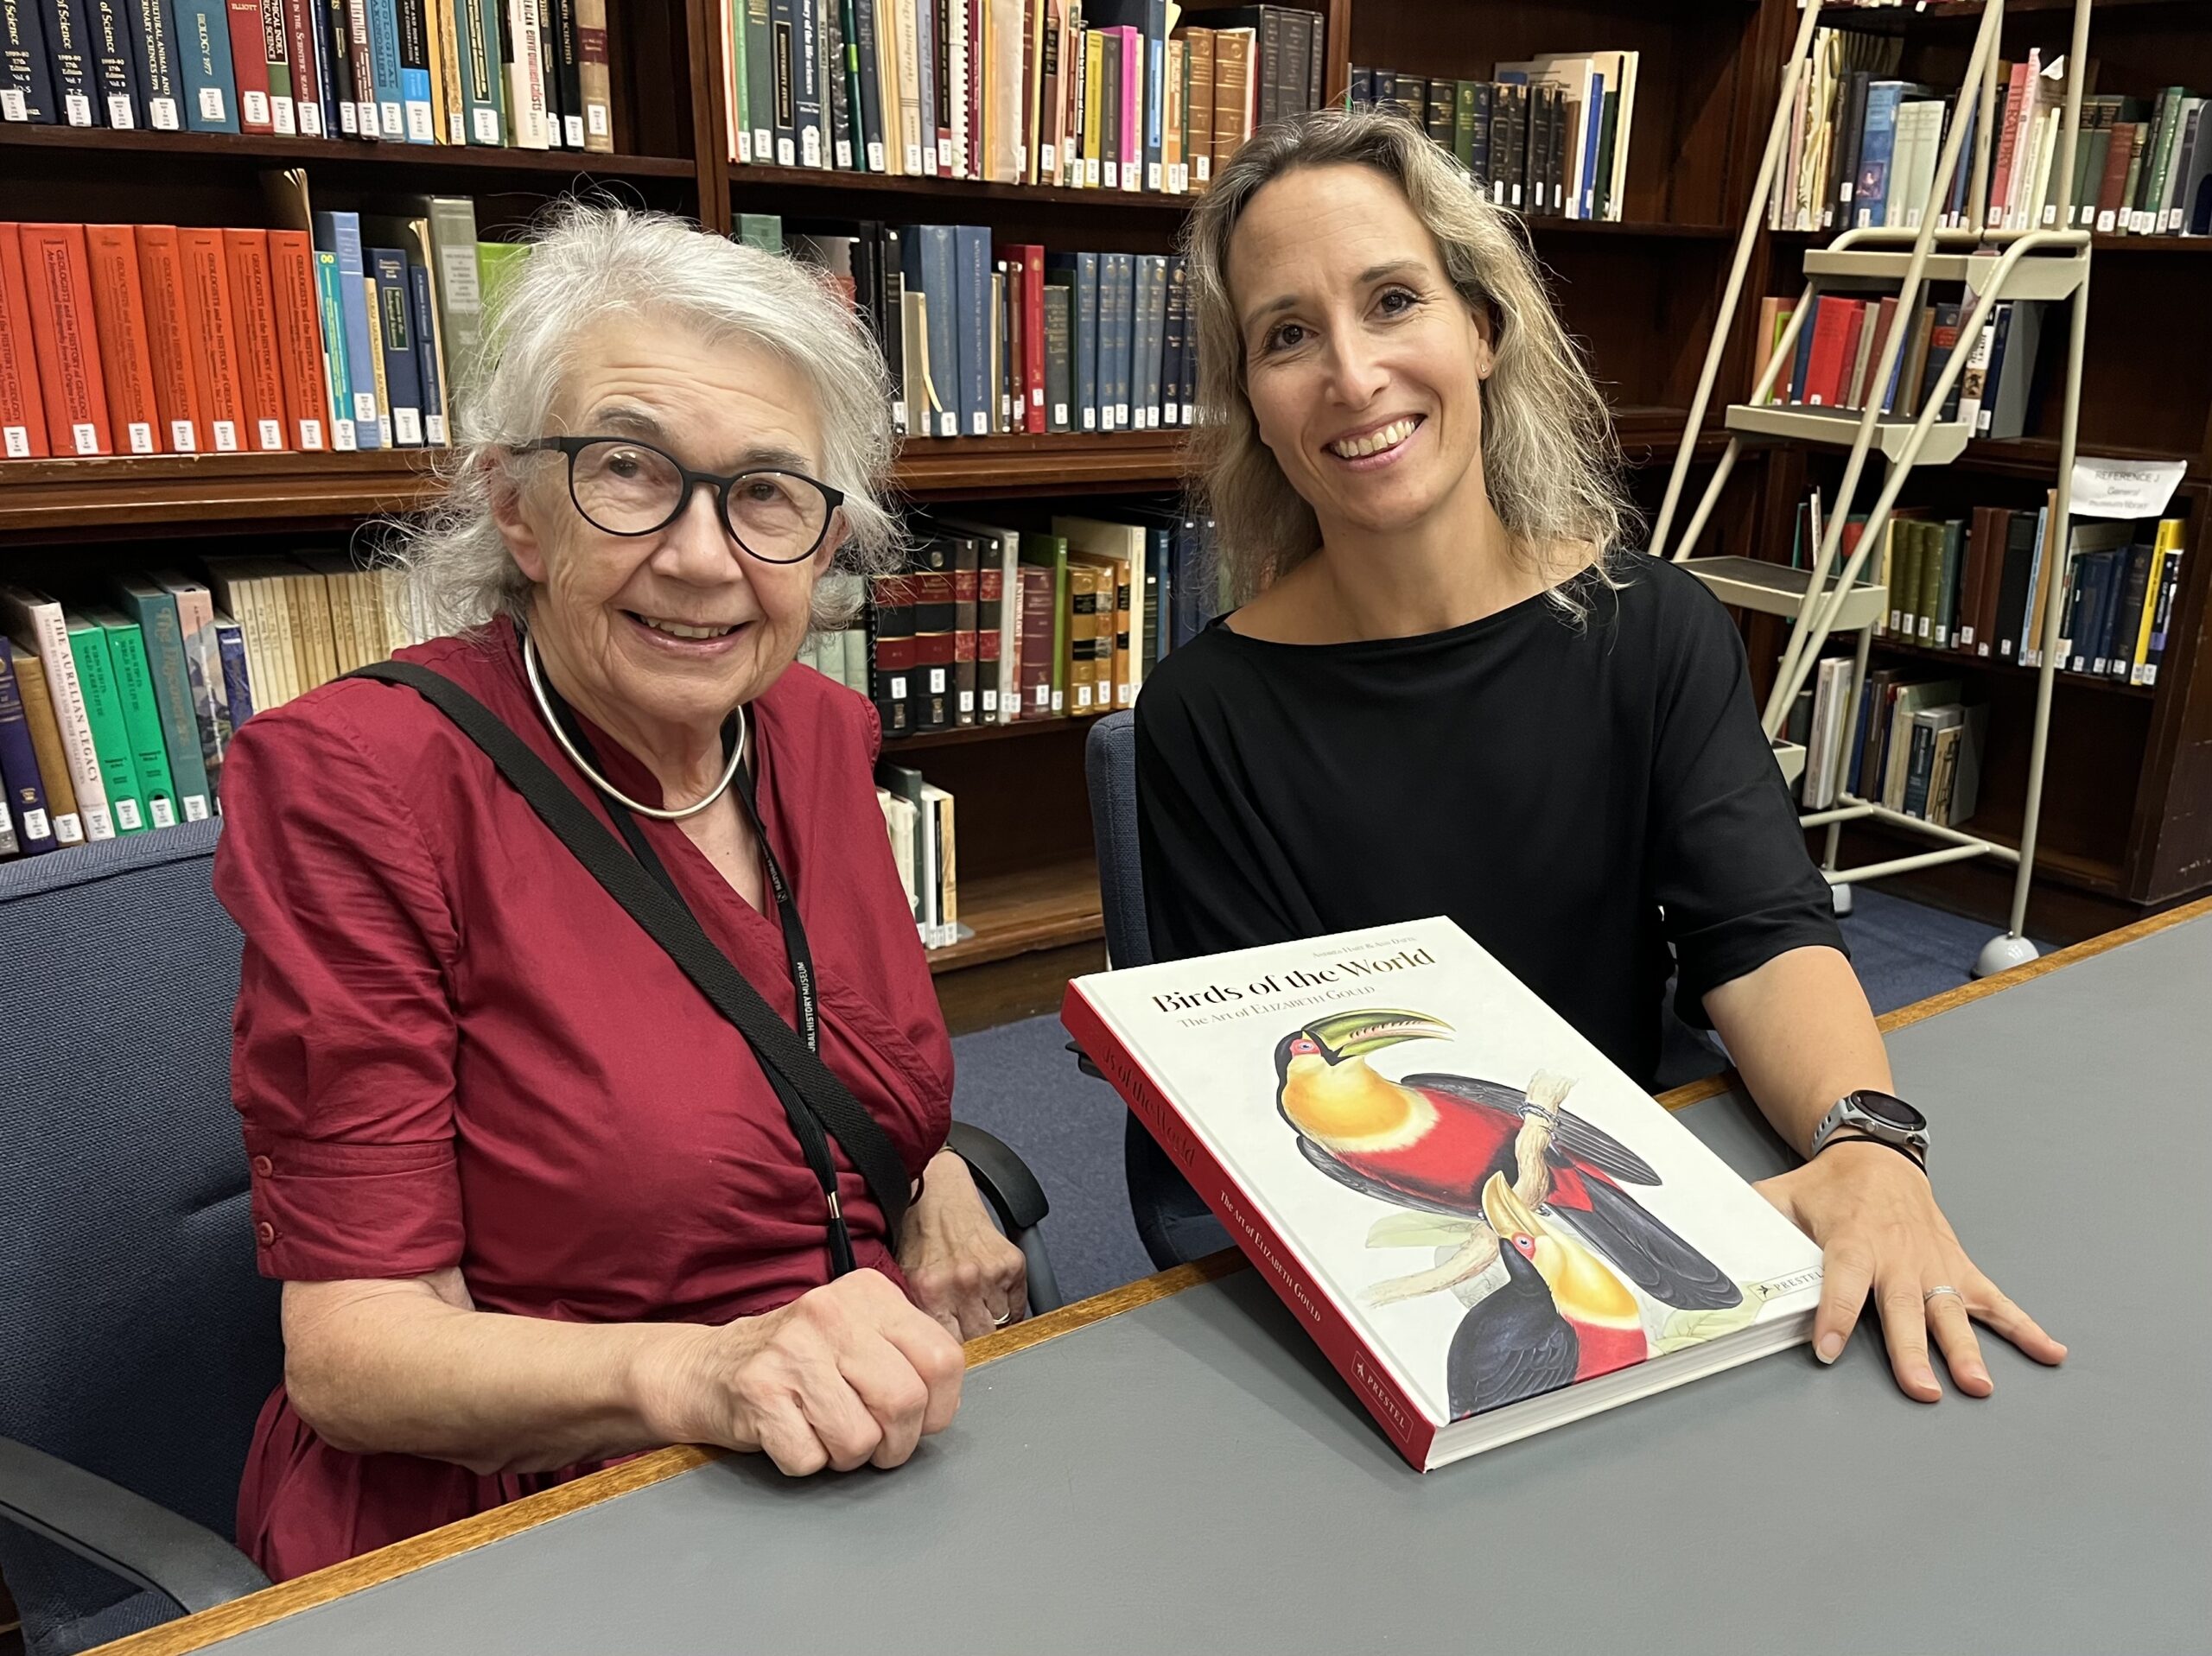 Ann Detta (right) and Andrea Hart (left) sat in the National History Museum library and archives holding a copy of Birds of the World: The Art of Elizabeth Gould.